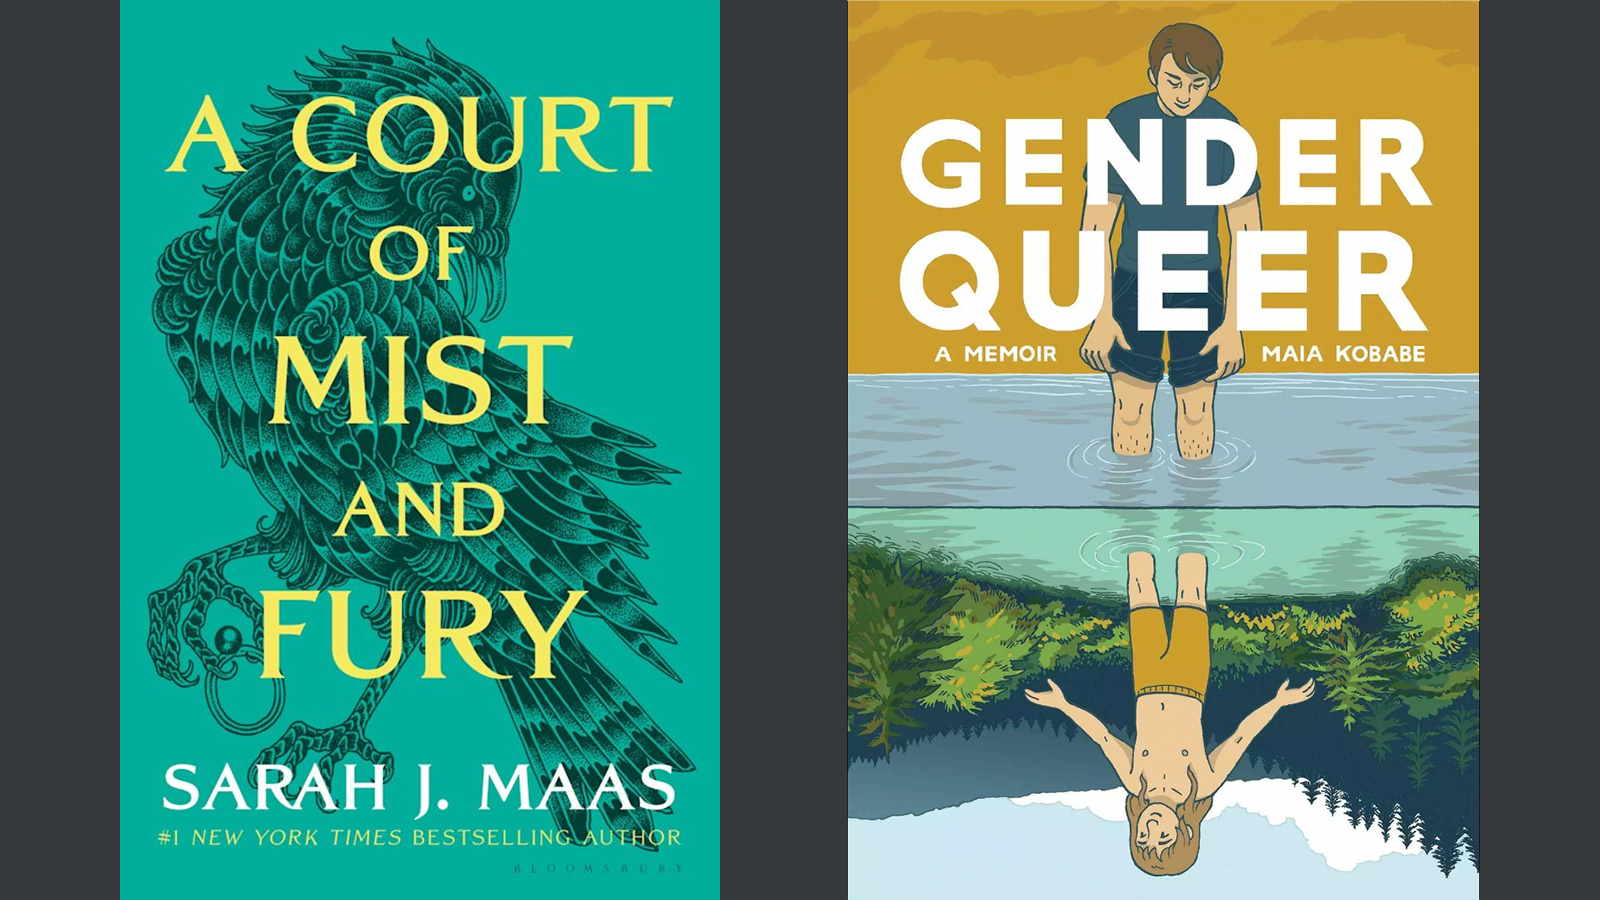 Covers of A Court of Mist and Fury by Sarah J. Maas and Gender Queer by Maia Kobabe